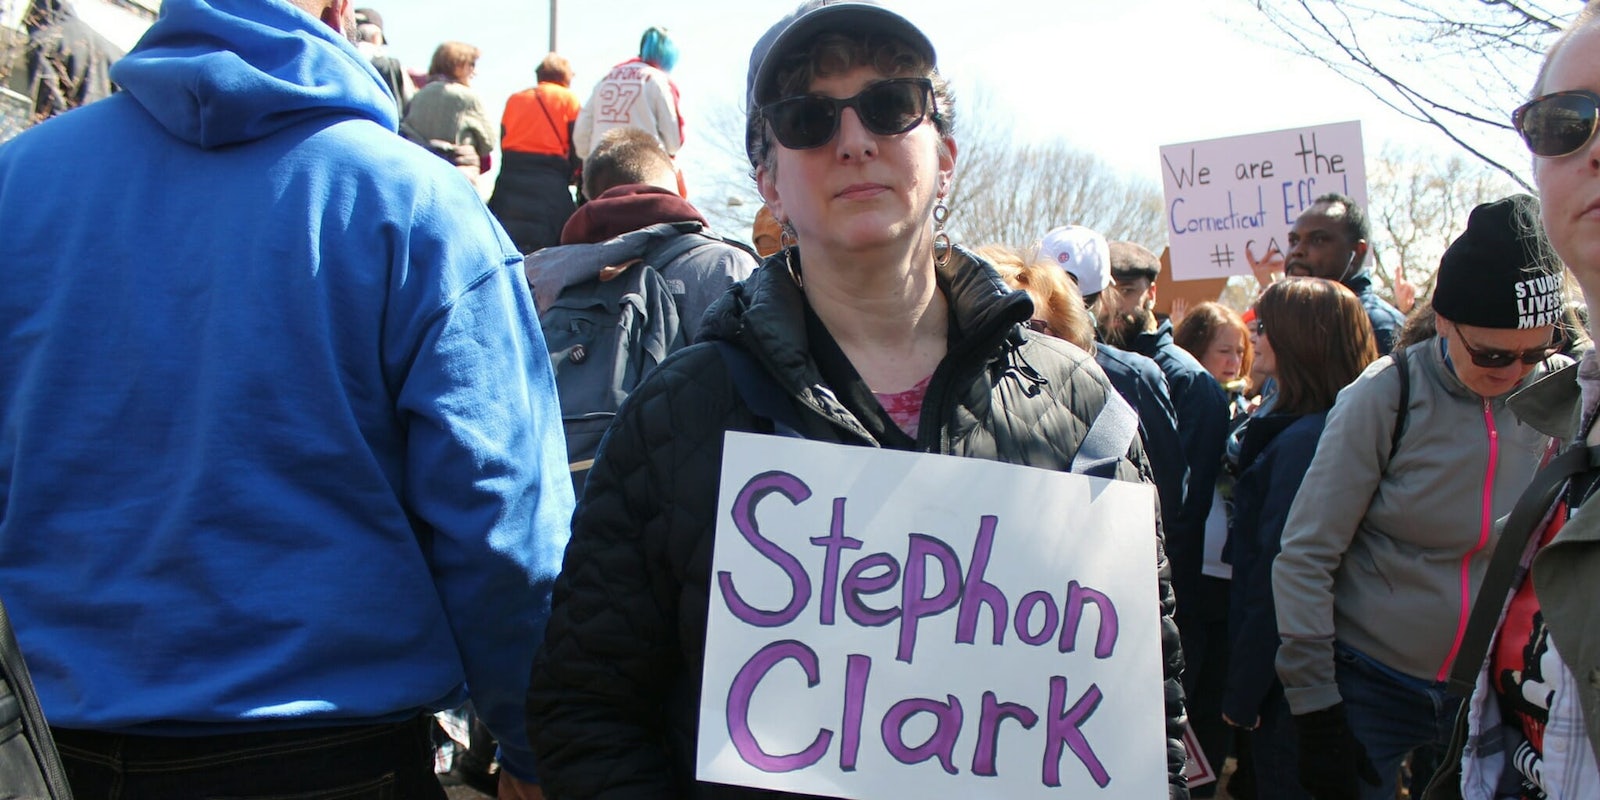 A protester at a March for Our Lives rally holding a sign with Stephon Clark's name on it.